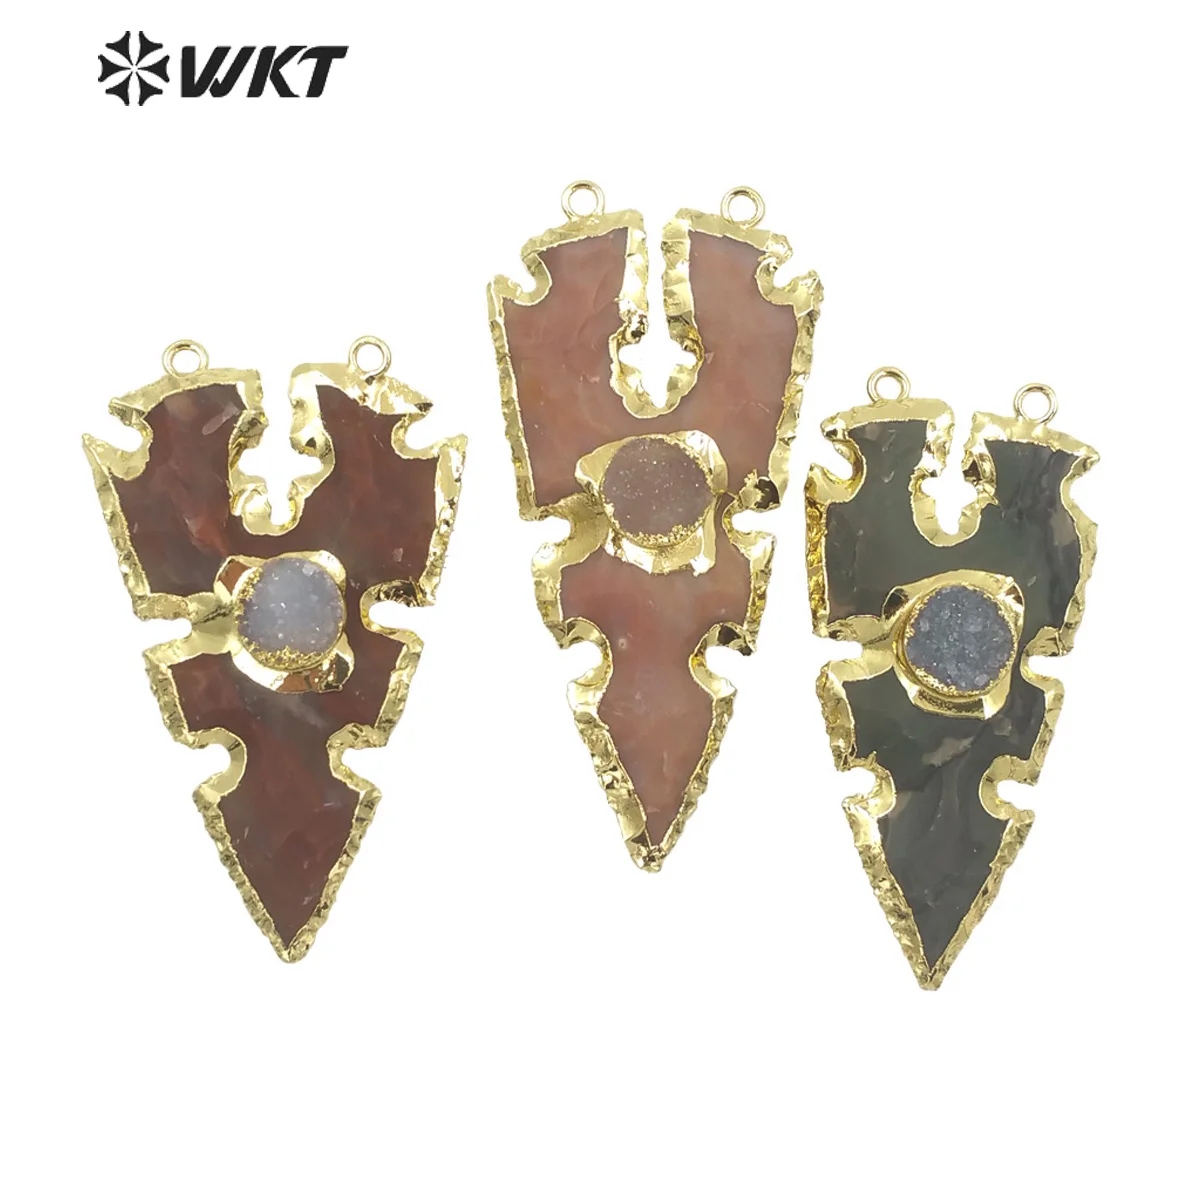 

WT-P1735 WKT New design fashion gold trim Natural druzy charm Agates Arrowhead pendant double loops 2.5 inch long stone carved